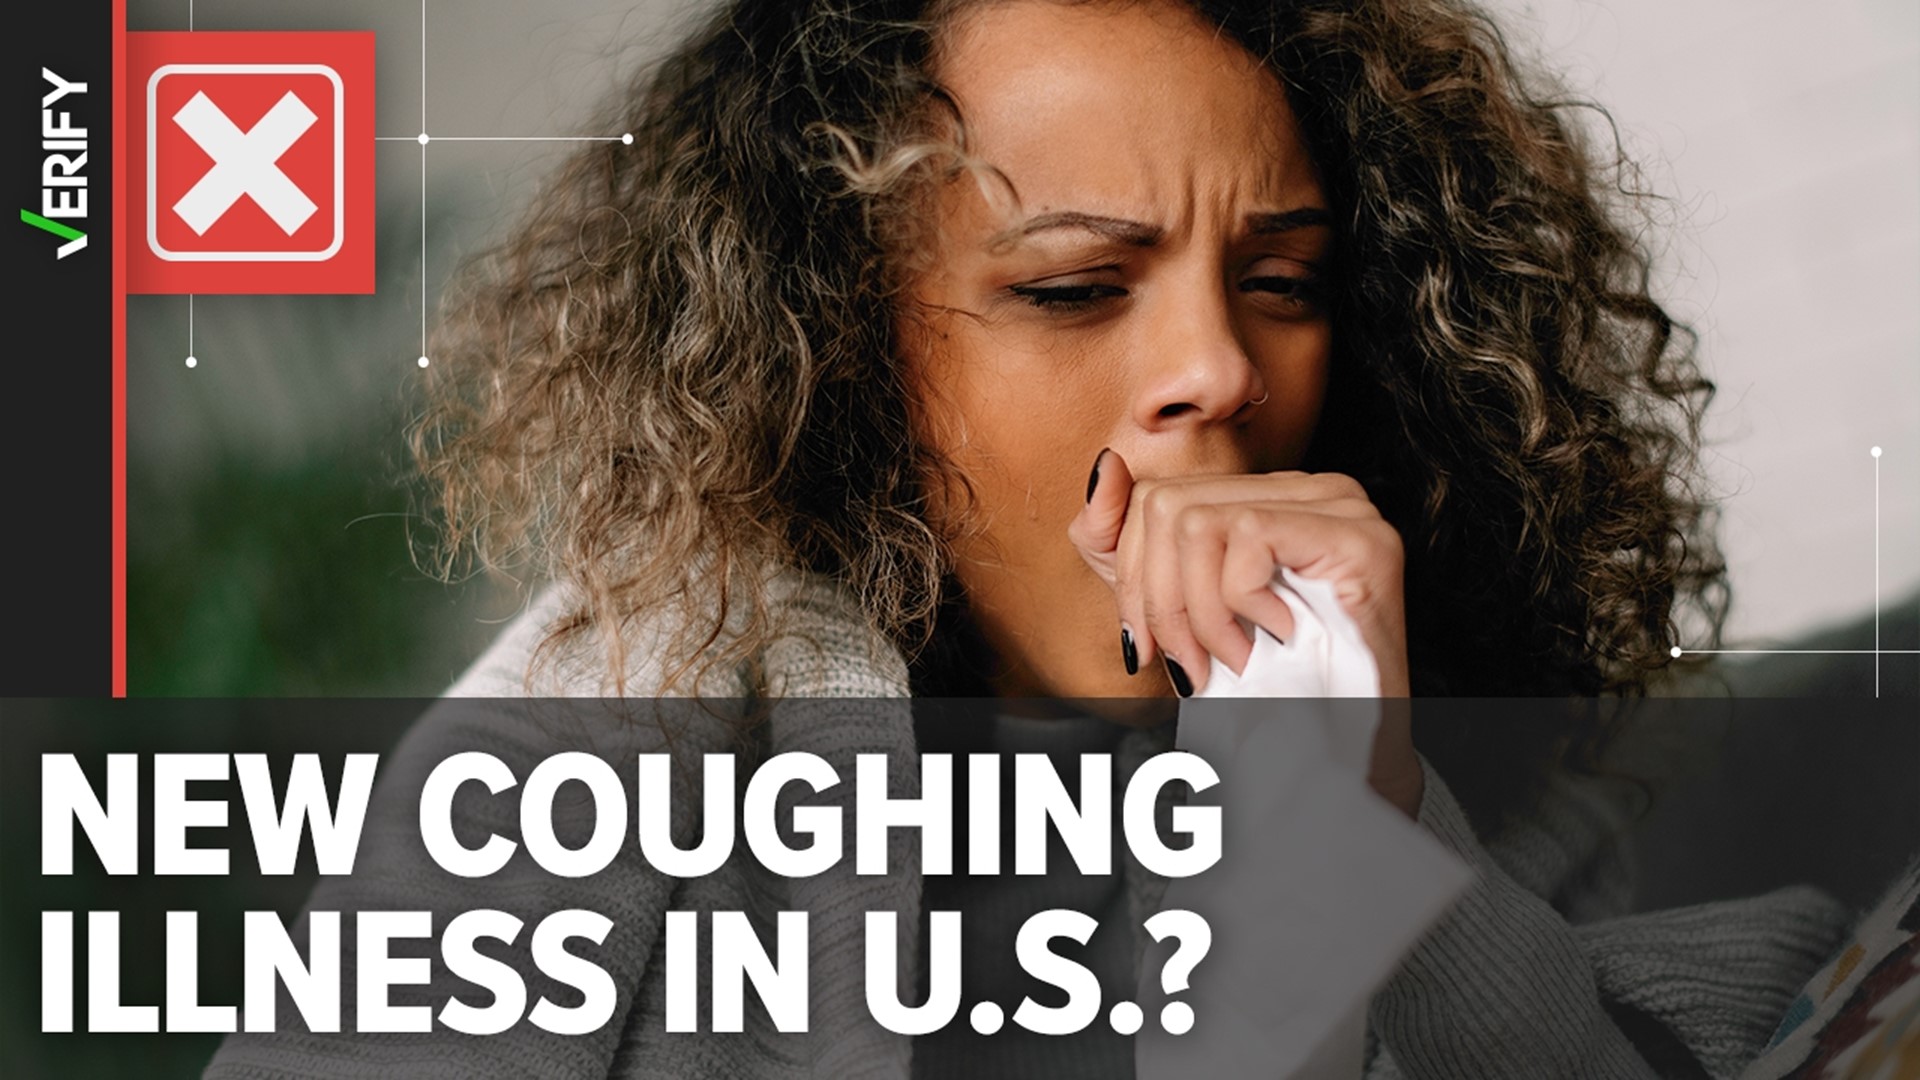 Do you have a hacking cough that’s been hanging on for weeks? Here’s what to know about viruses that can cause a lingering cough and when to see a doctor.